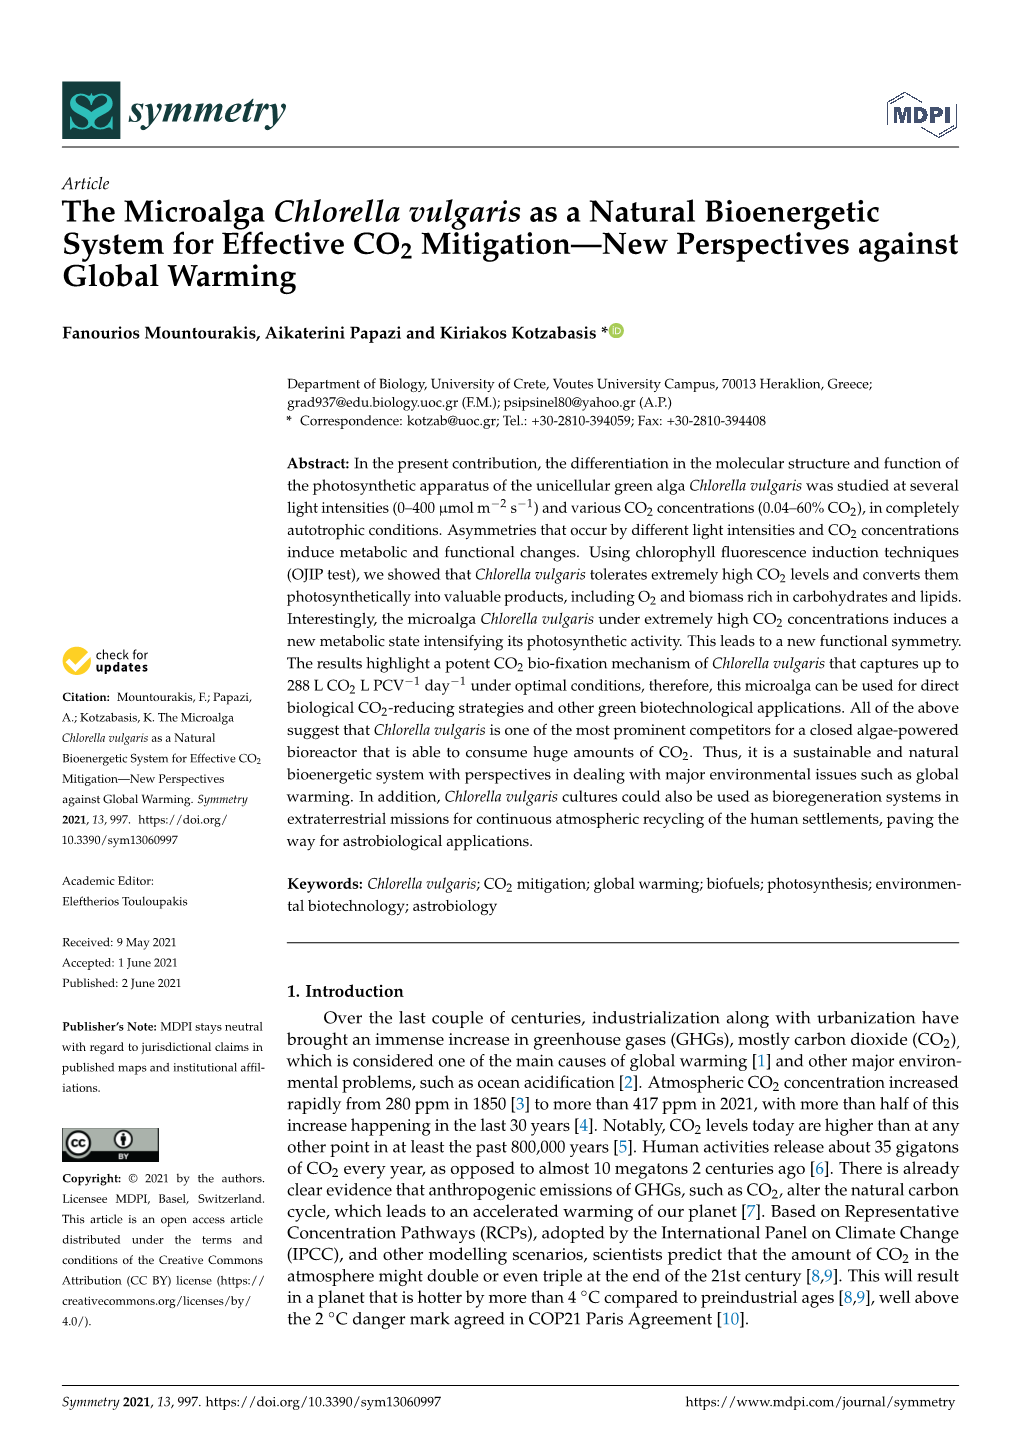 The Microalga Chlorella Vulgaris As a Natural Bioenergetic System for Effective CO2 Mitigation—New Perspectives Against Global Warming